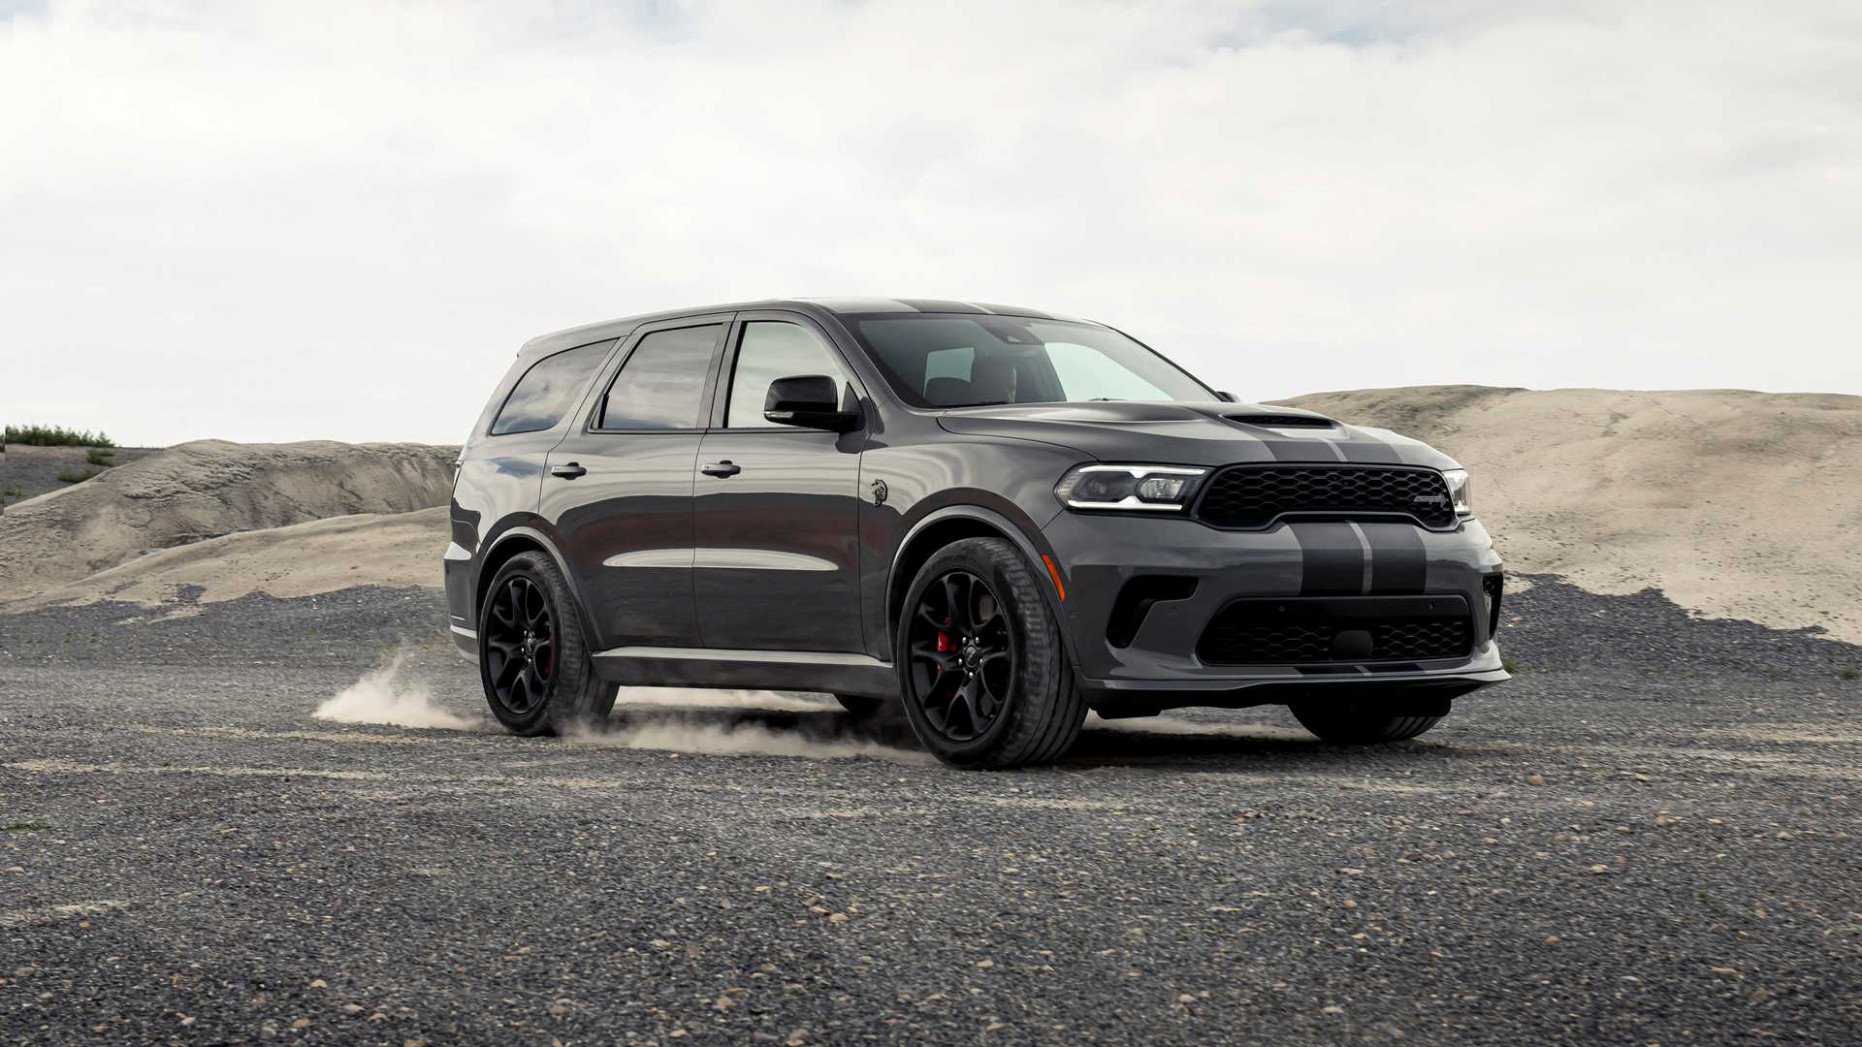 11 Dodge Durango Rumored With Jeep Wagoneer's Truck Chassis